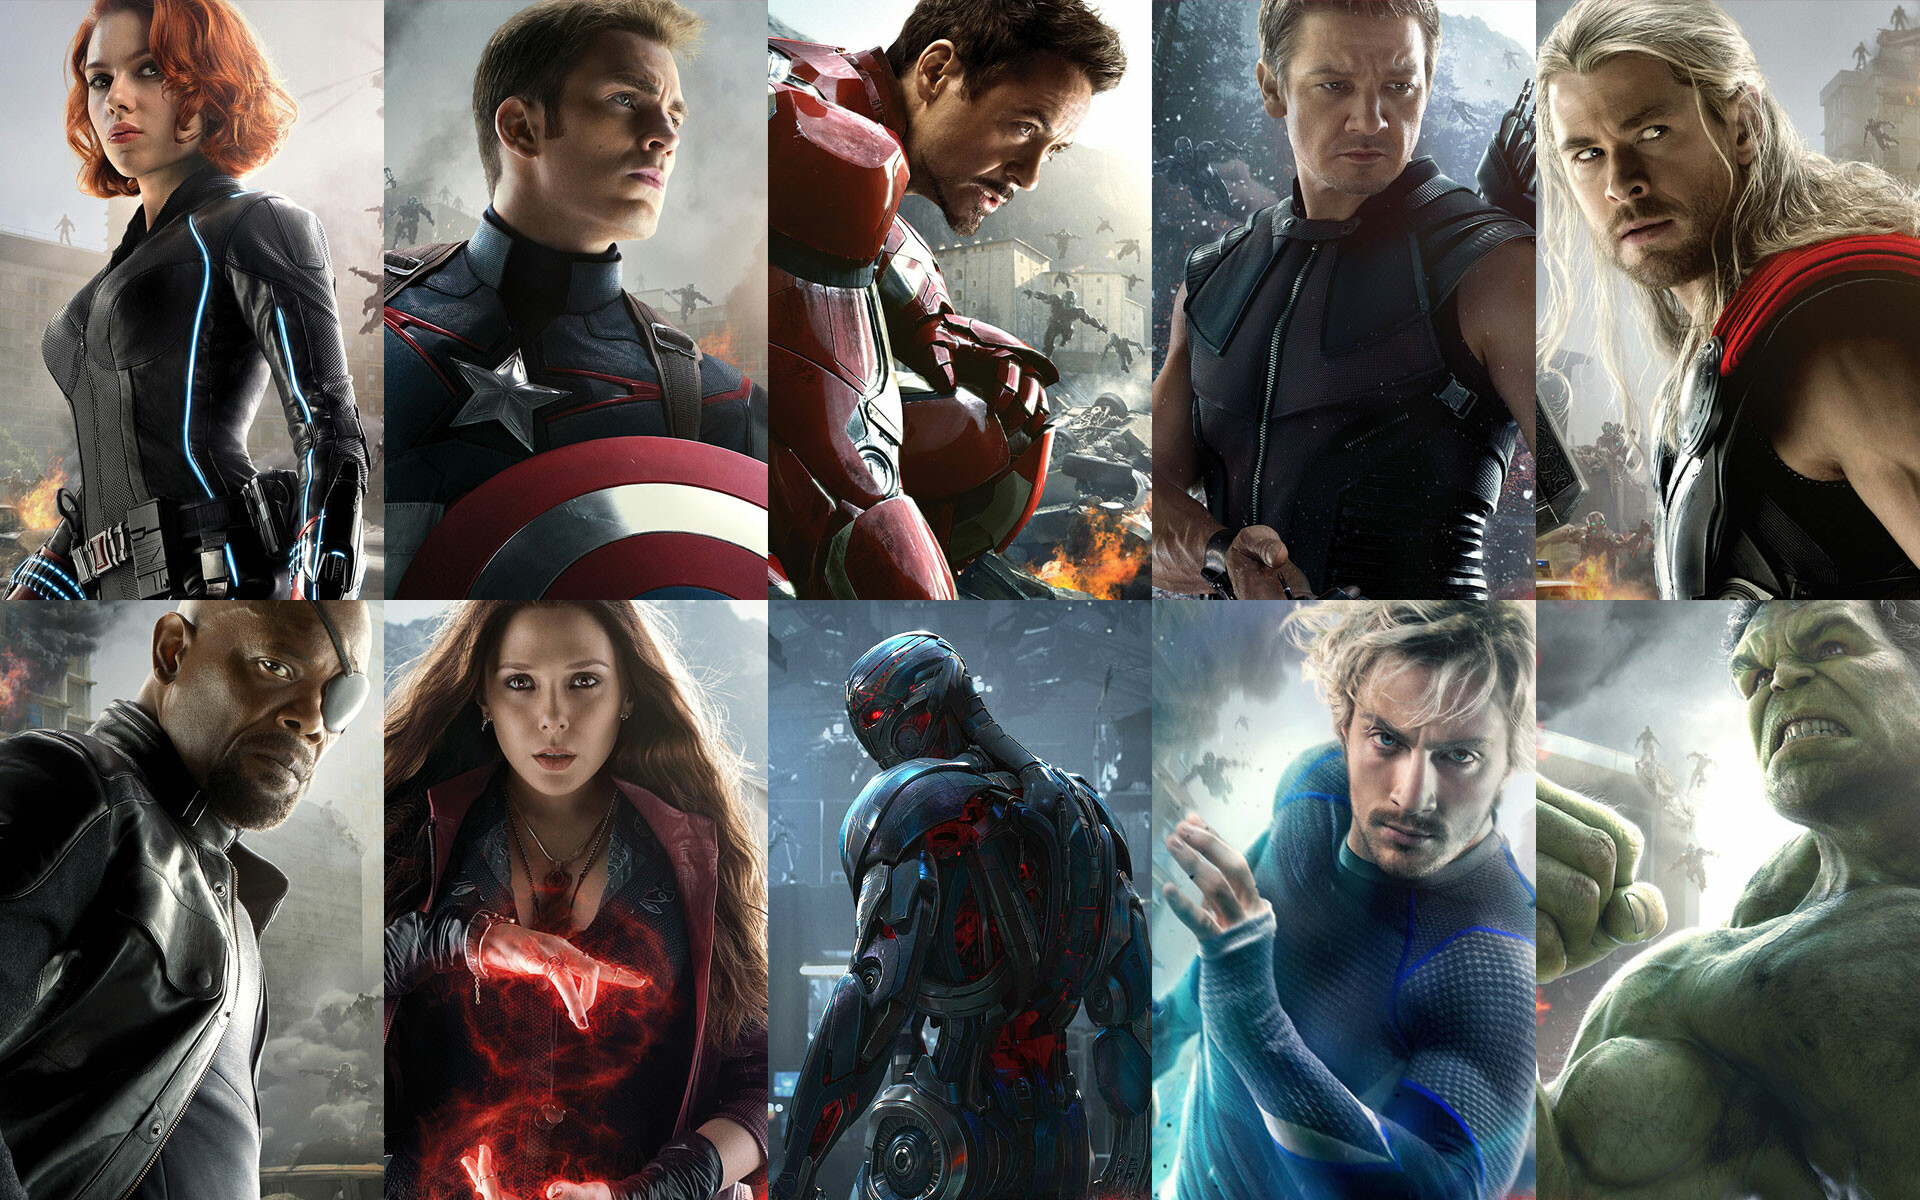 Avengers: With Age of Ultron, writer and director Joss Whedon brings back the six heroes known as "Earth's Mightiest" from 2012's record-breaking team-up epic and adds to it with several new super-powered characters from Marvel Comics. 1920x1200 HD Wallpaper.